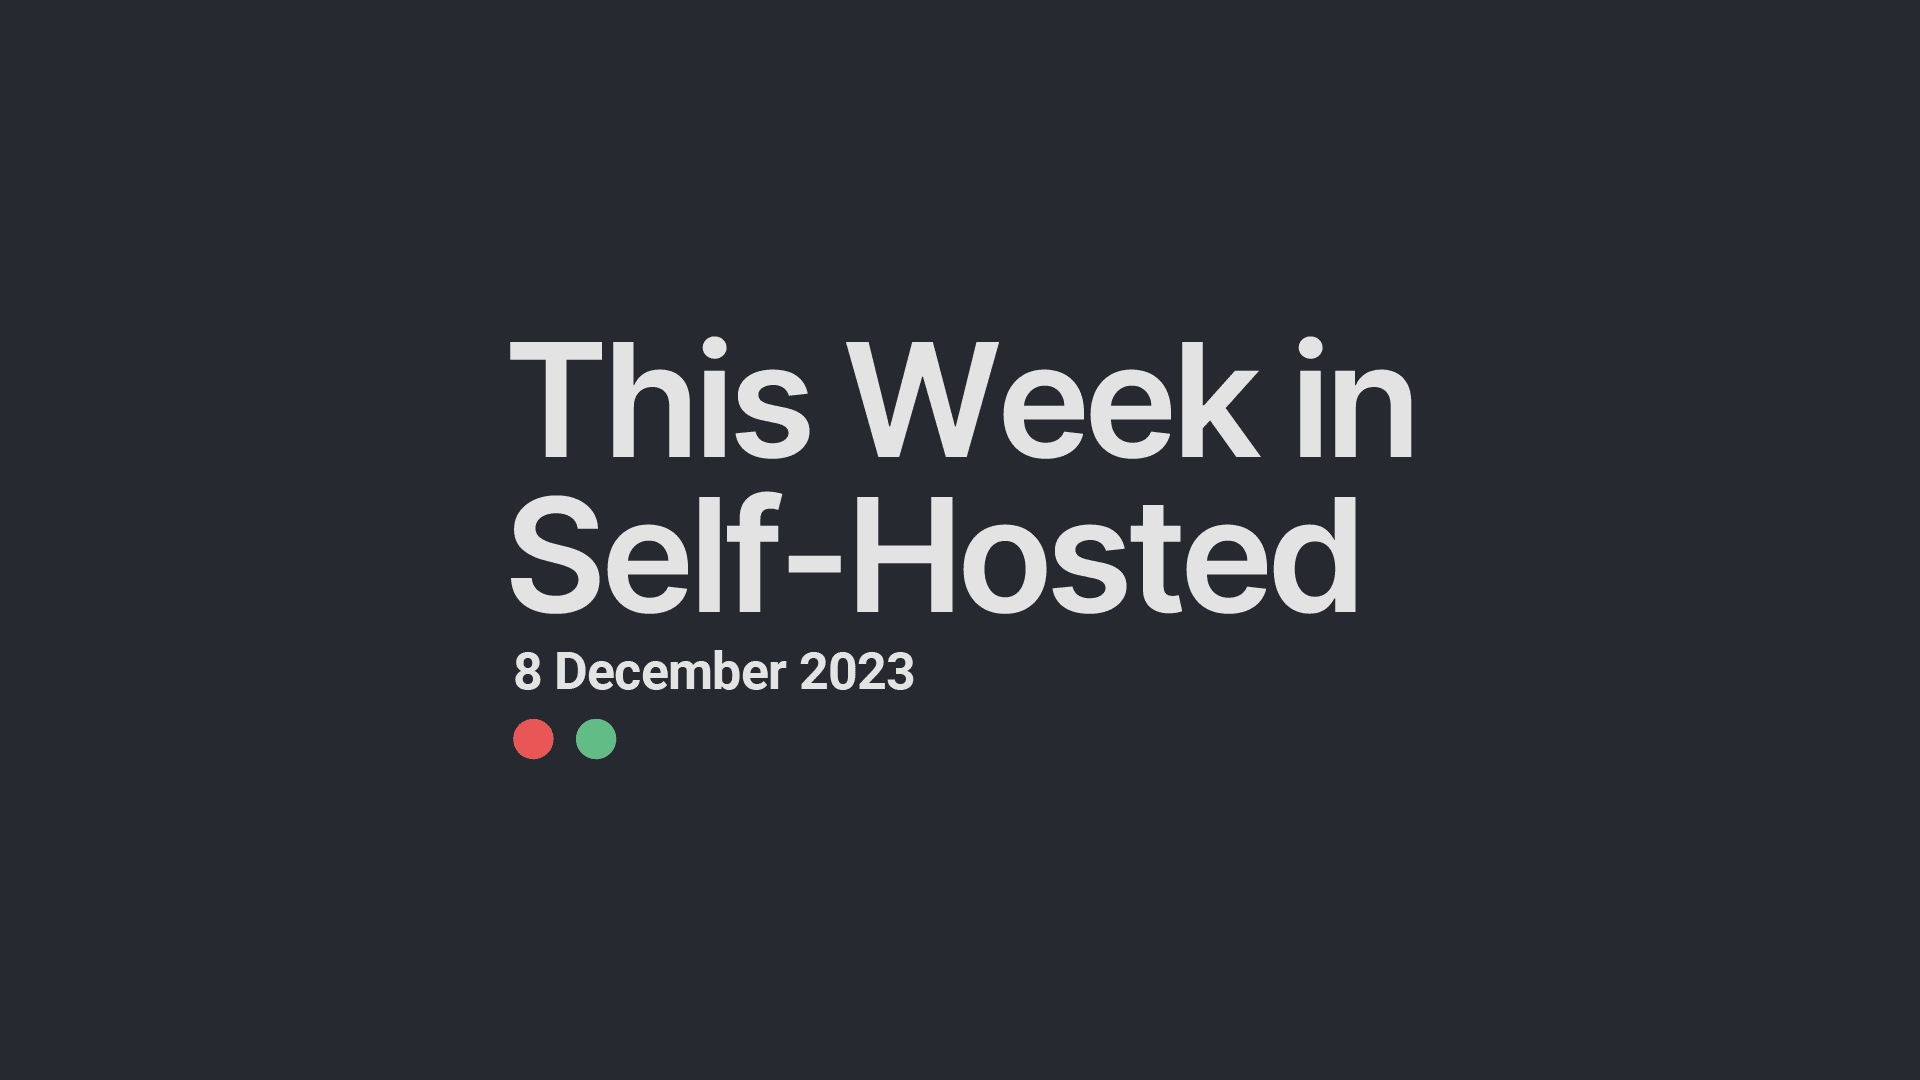 This Week in Self-Hosted (8 December 2023) Post image